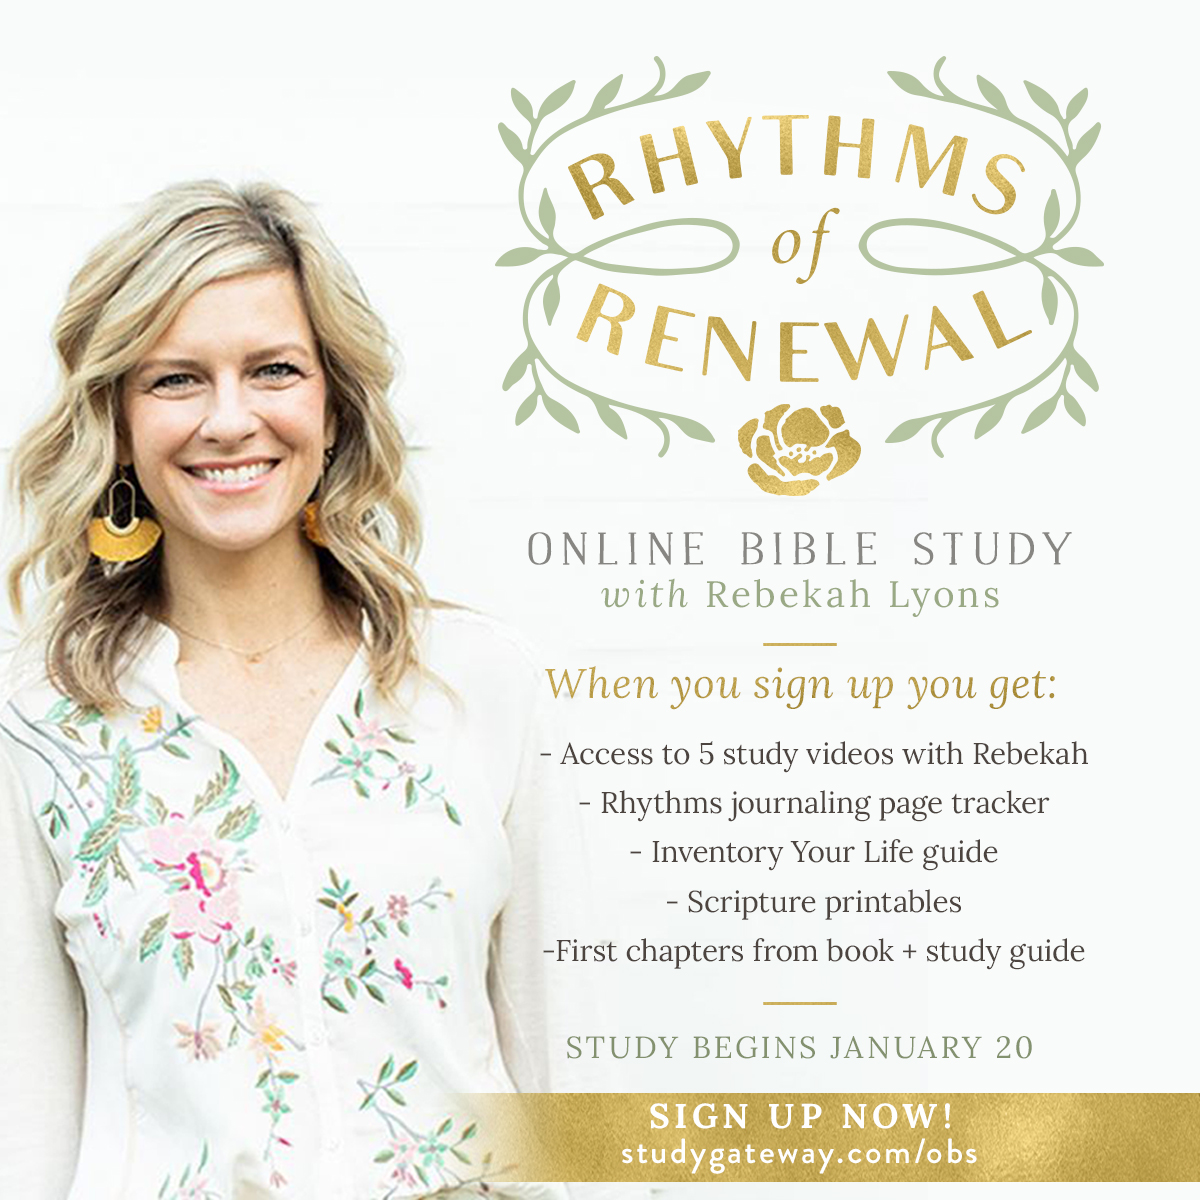 You’re Invited to the Rhythms of Renewal Online Bible Study